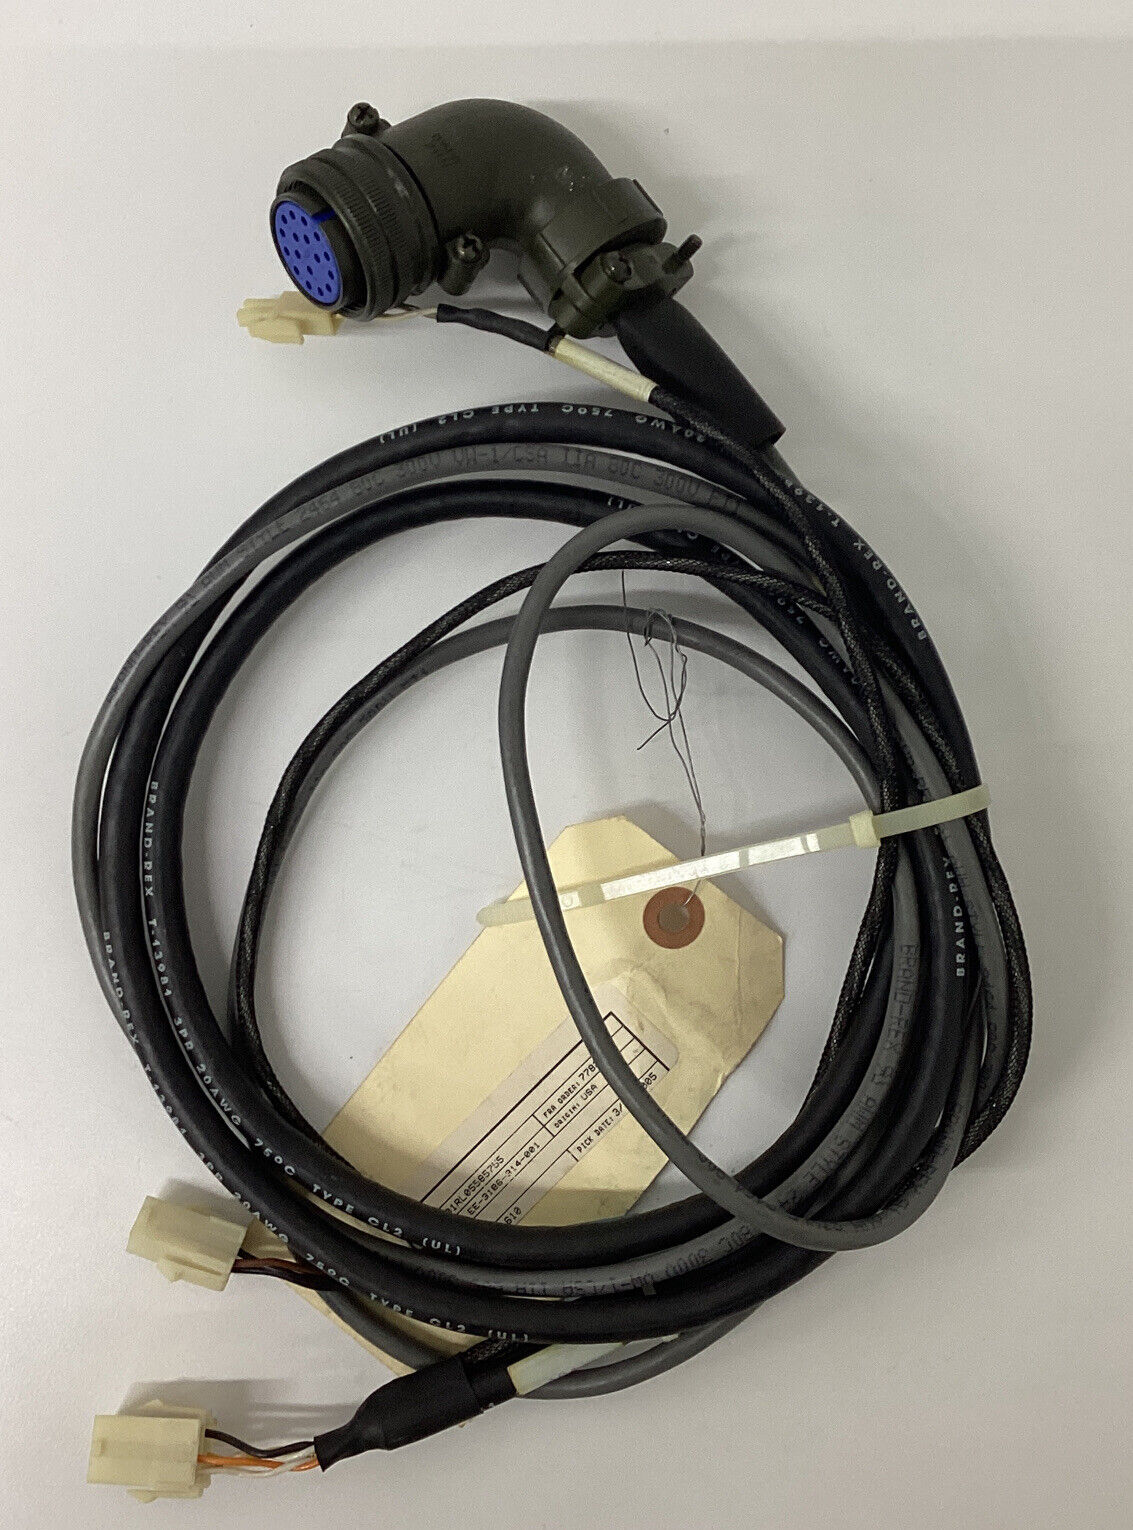 Fanuc EE-3186-314-001  P-10 Axis 1 Encoder Cable (CBL130)